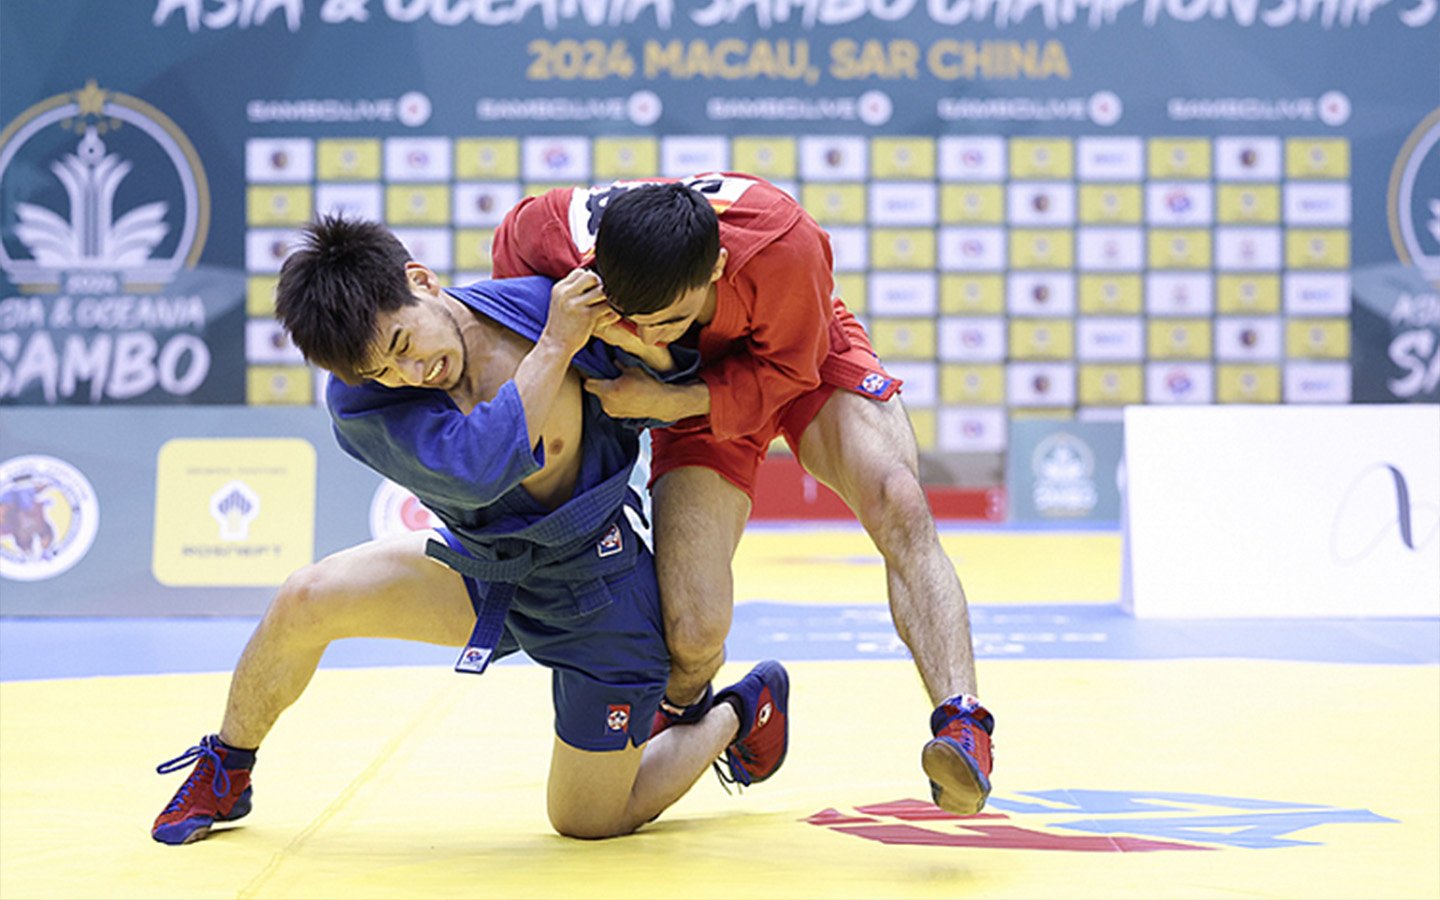 Macao hosts the Asia and Oceania Sambo Championships